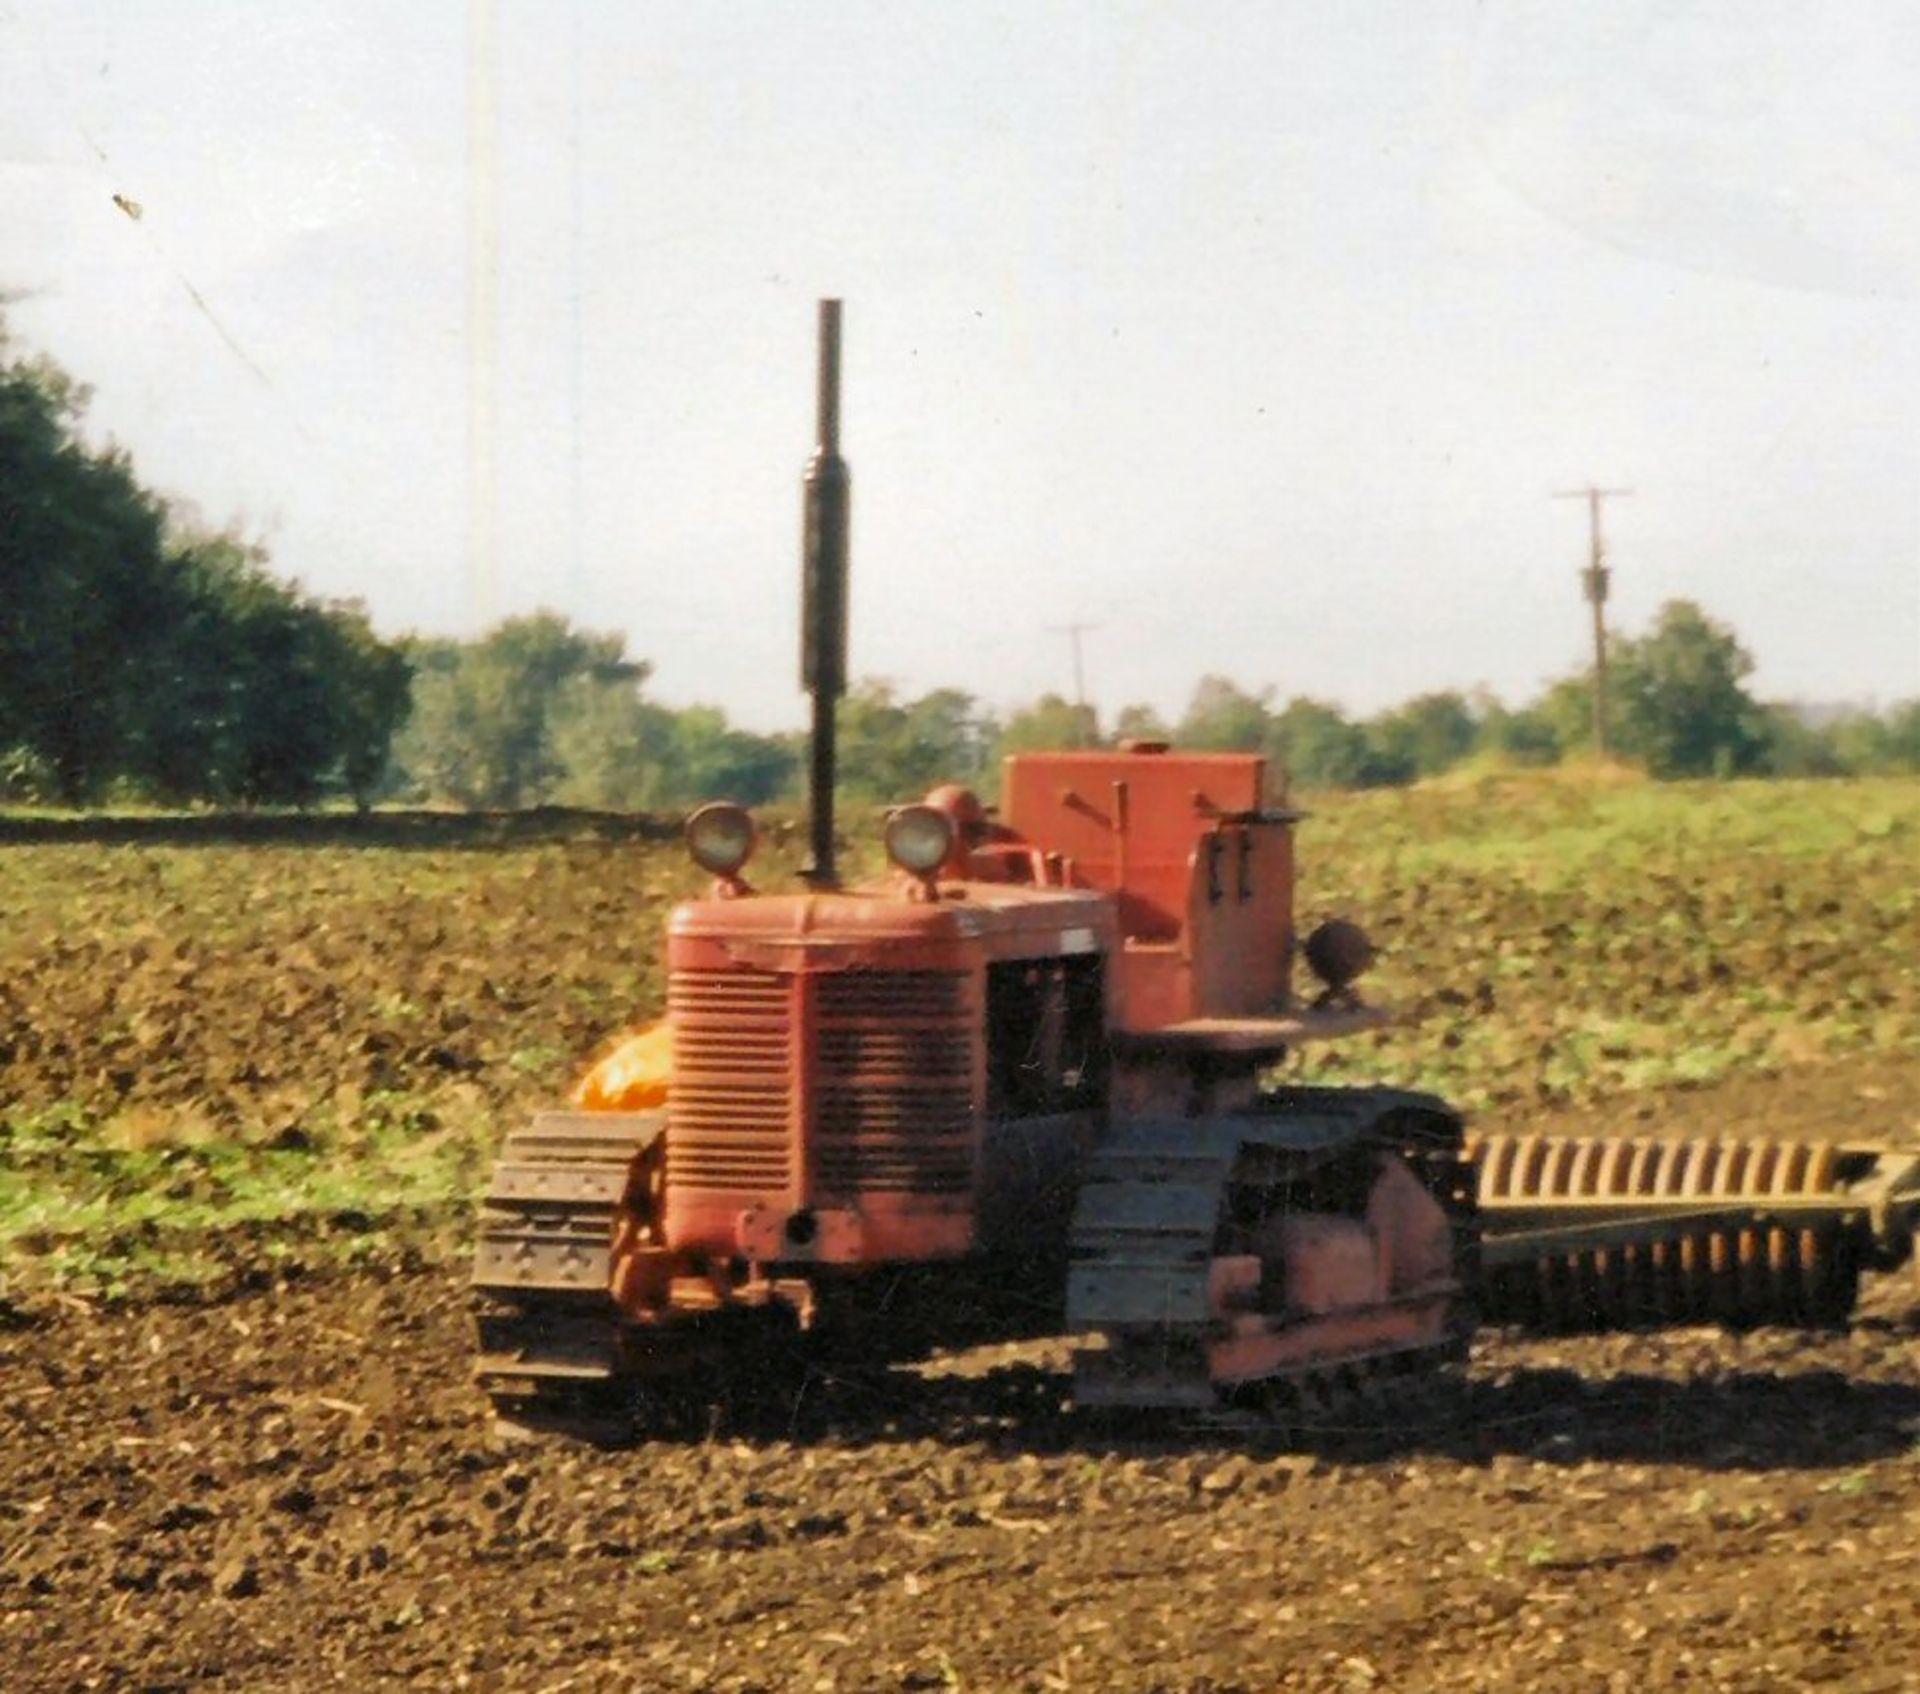 INTERNATIONAL BTD6 4cylinder diesel CRAWLER TRACTOR Serial No. 21278T7 Rescued from a shed after a